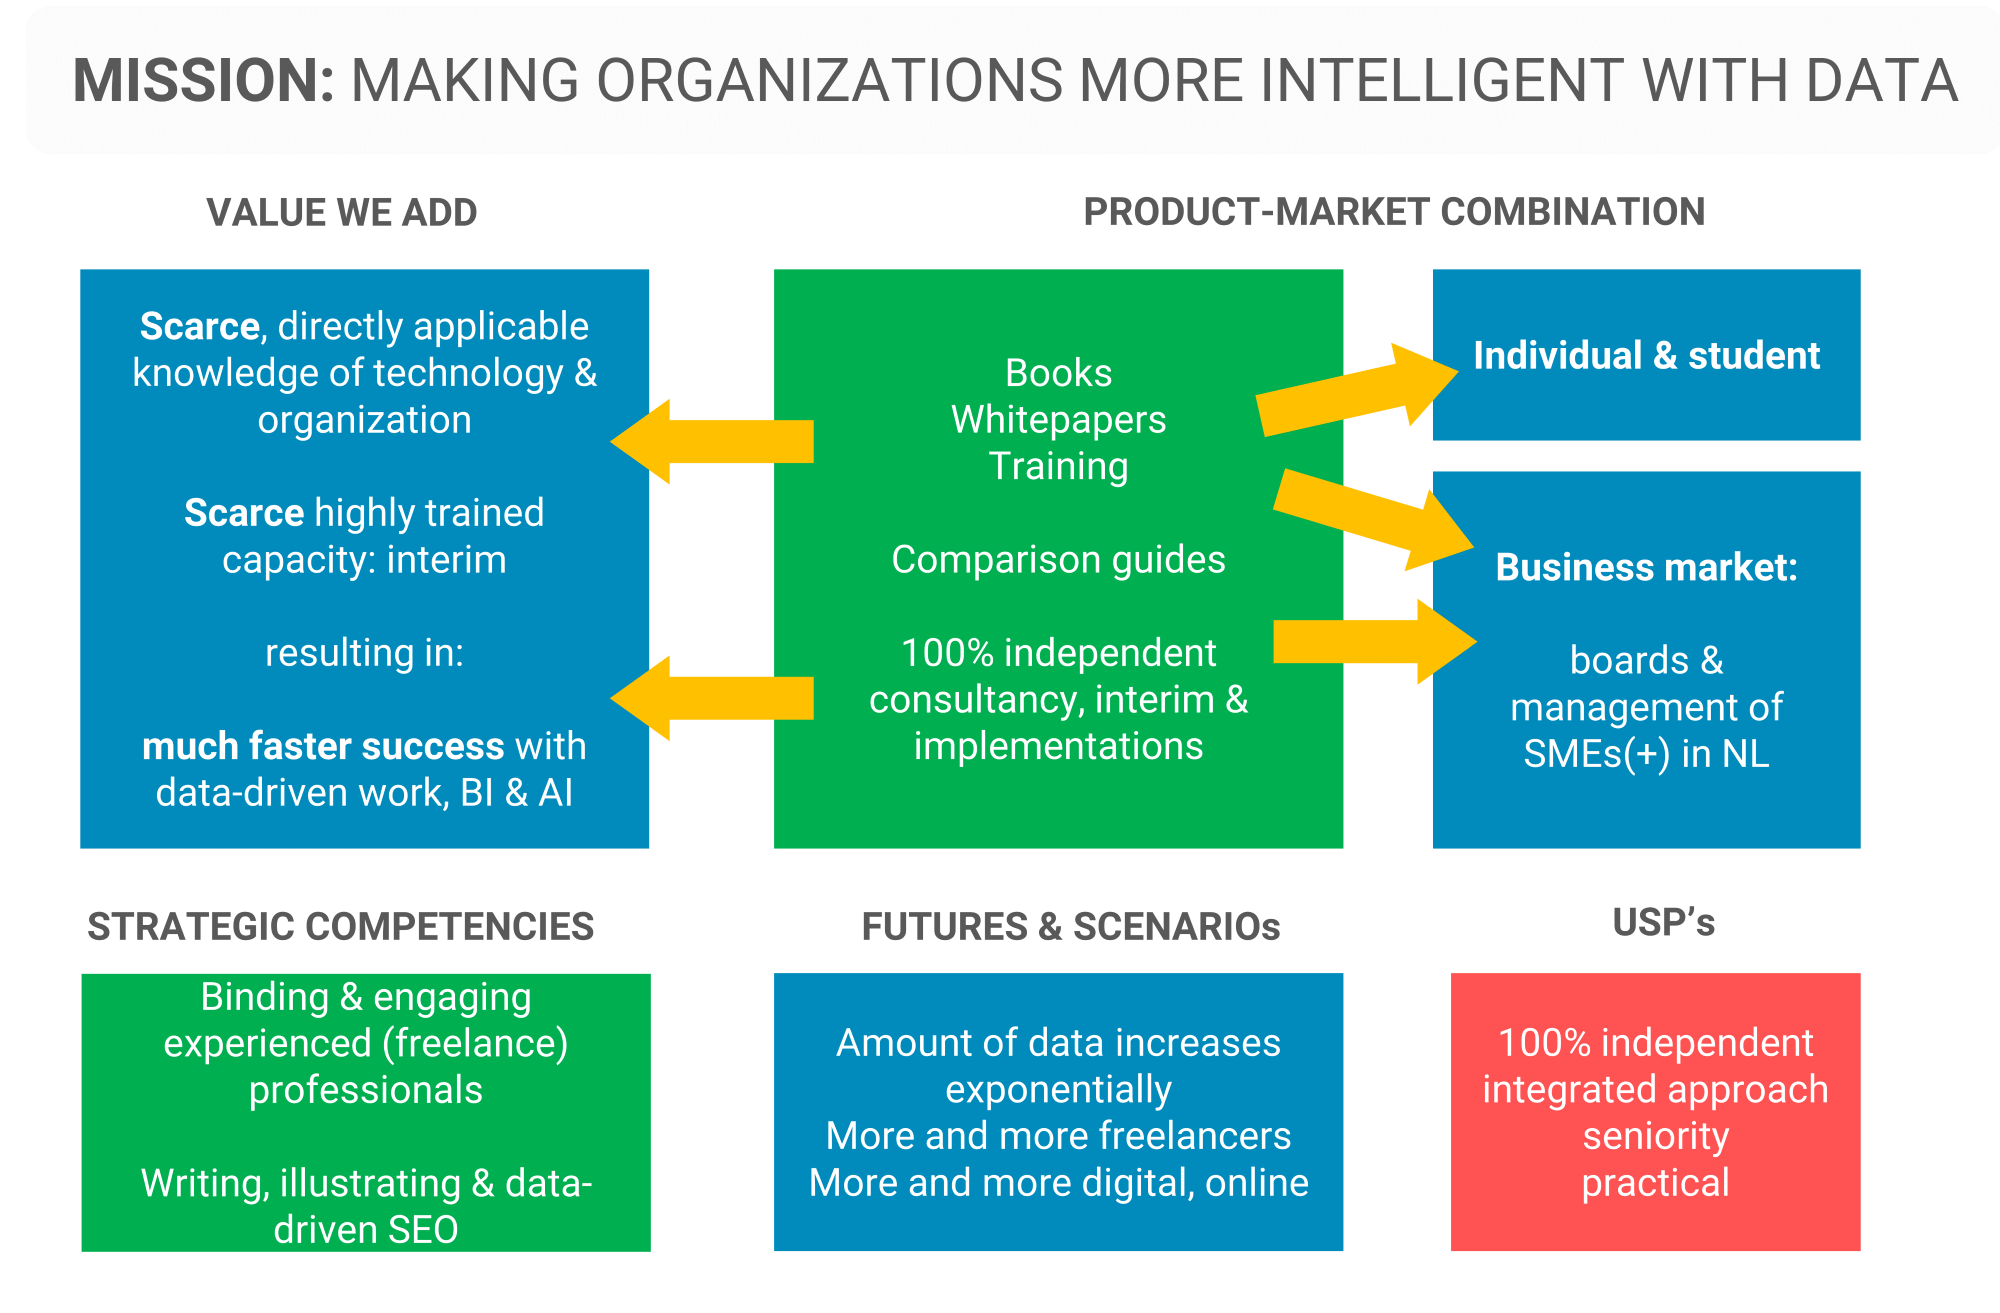 Making organizations more intelligent with data